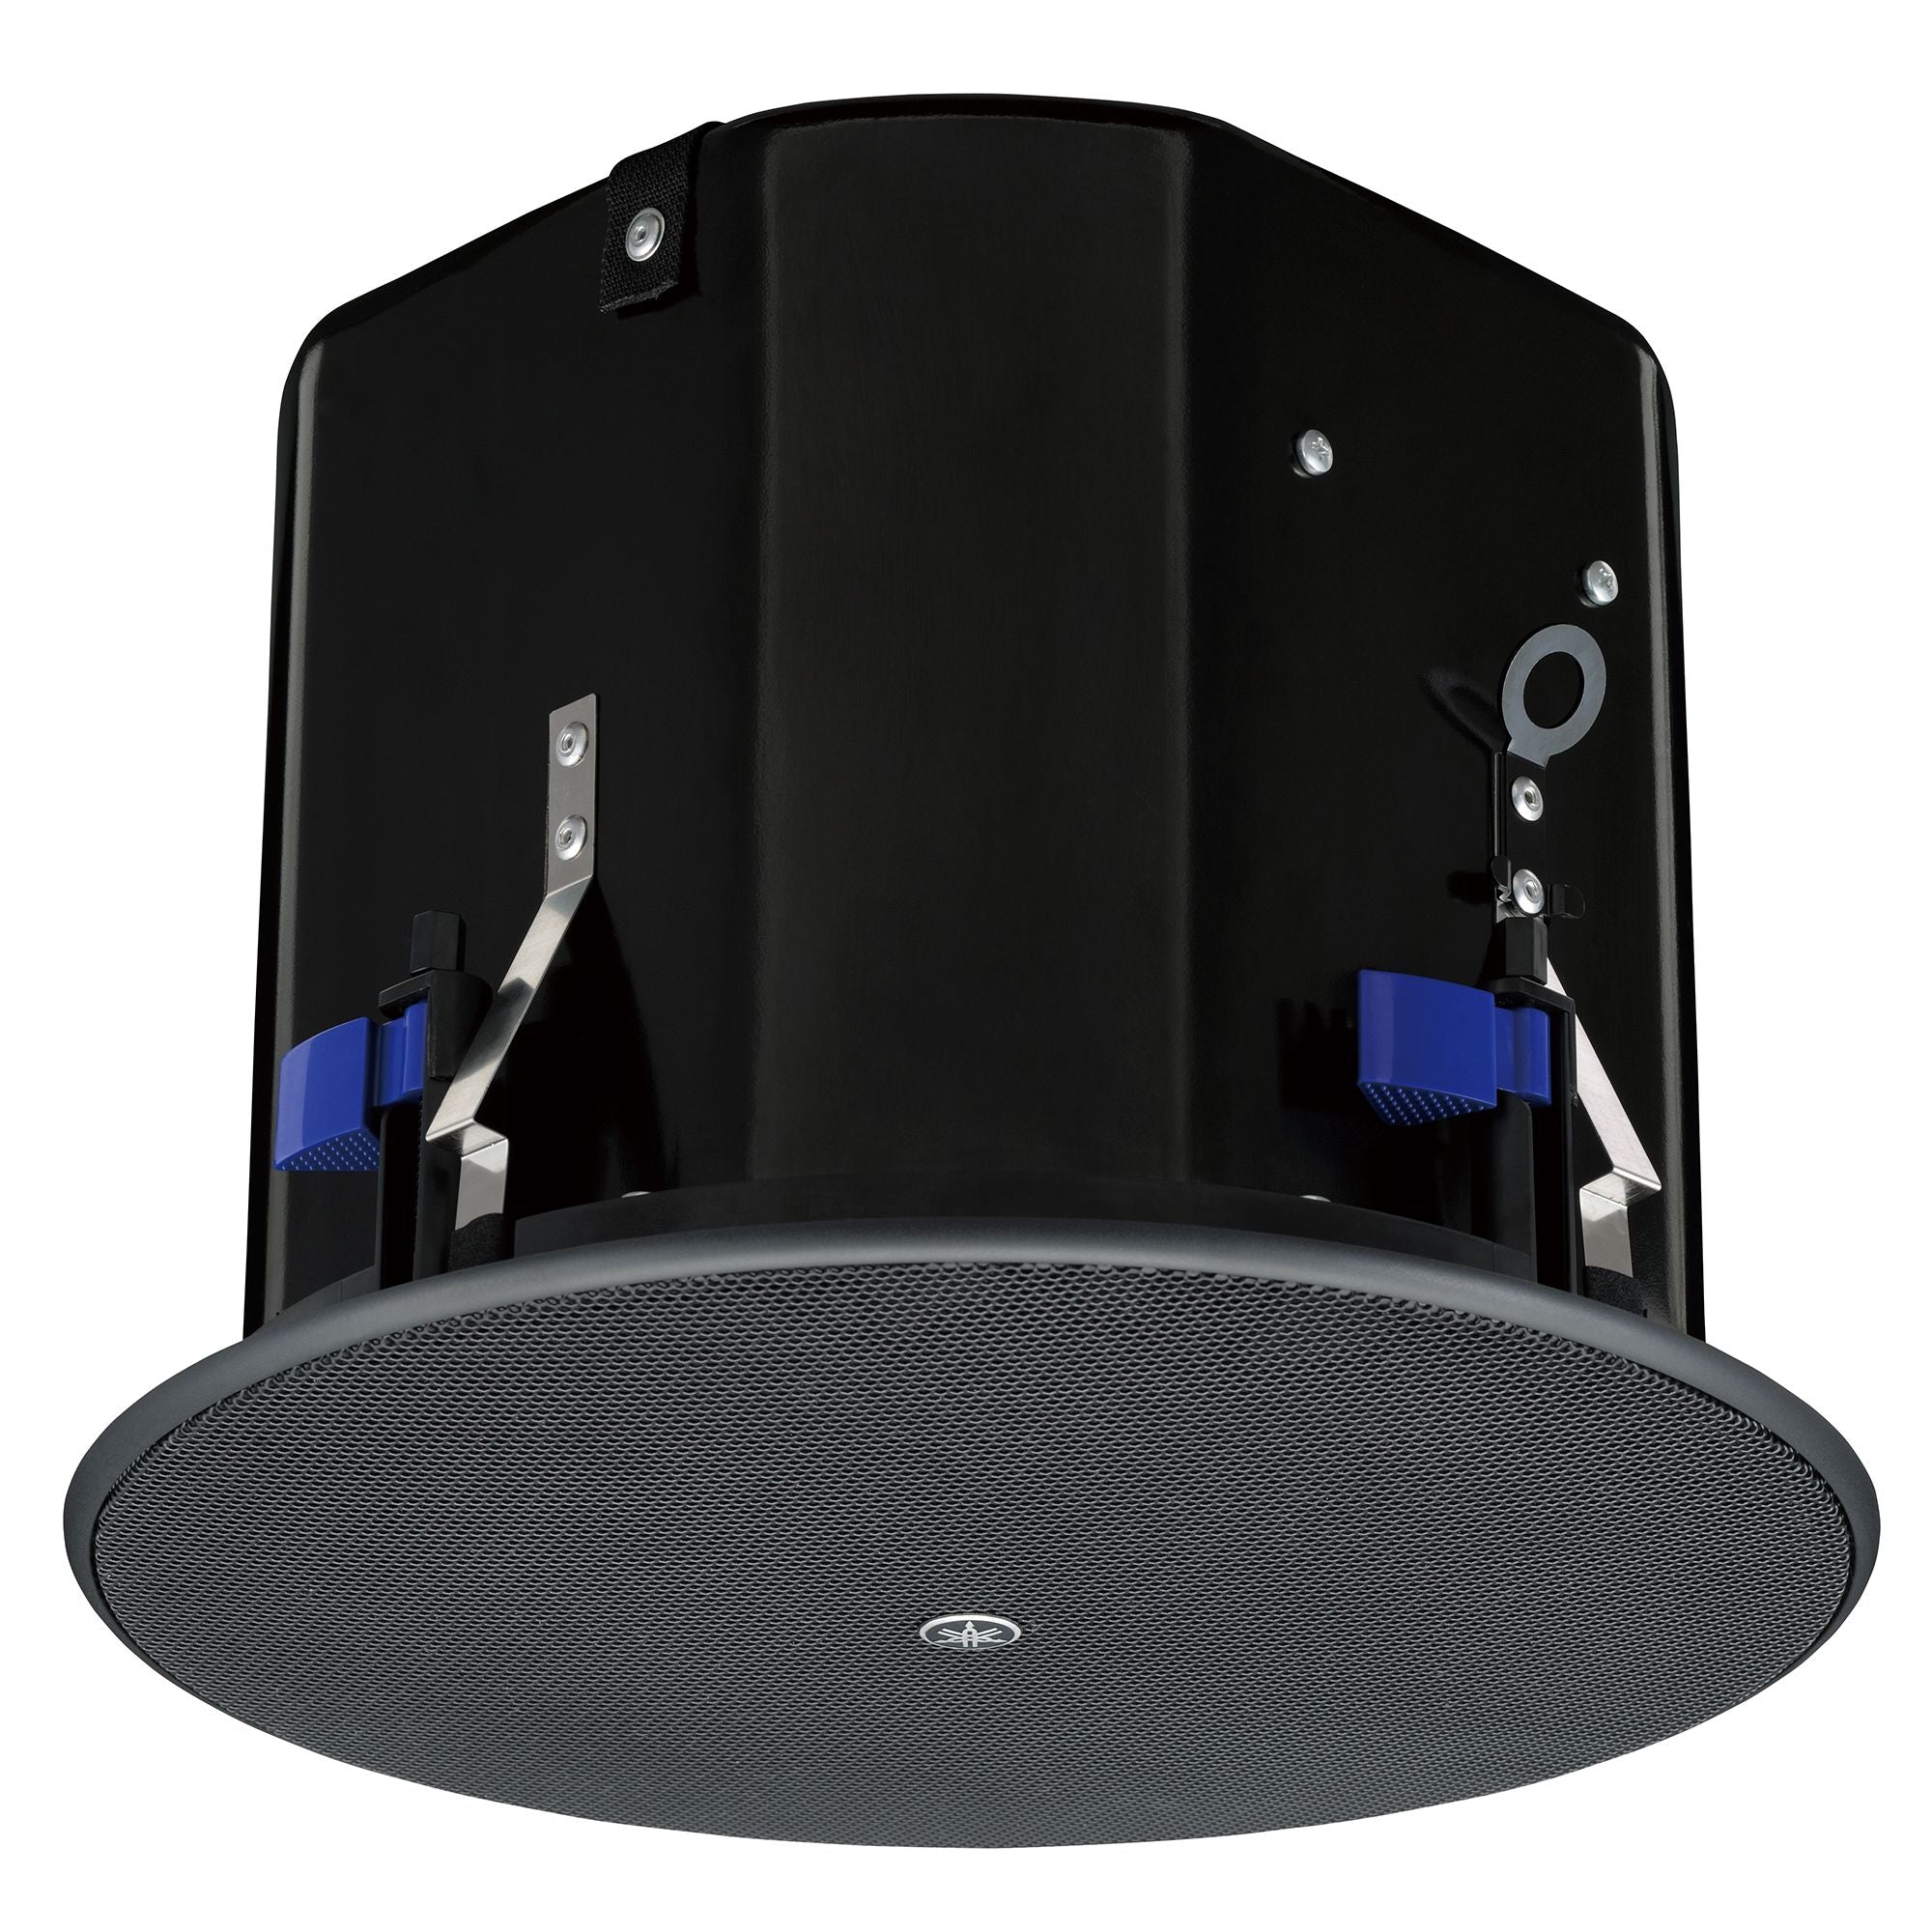 Yamaha VXC8 Ceiling speaker 8" cone woofer with a 1" soft dome tweeter